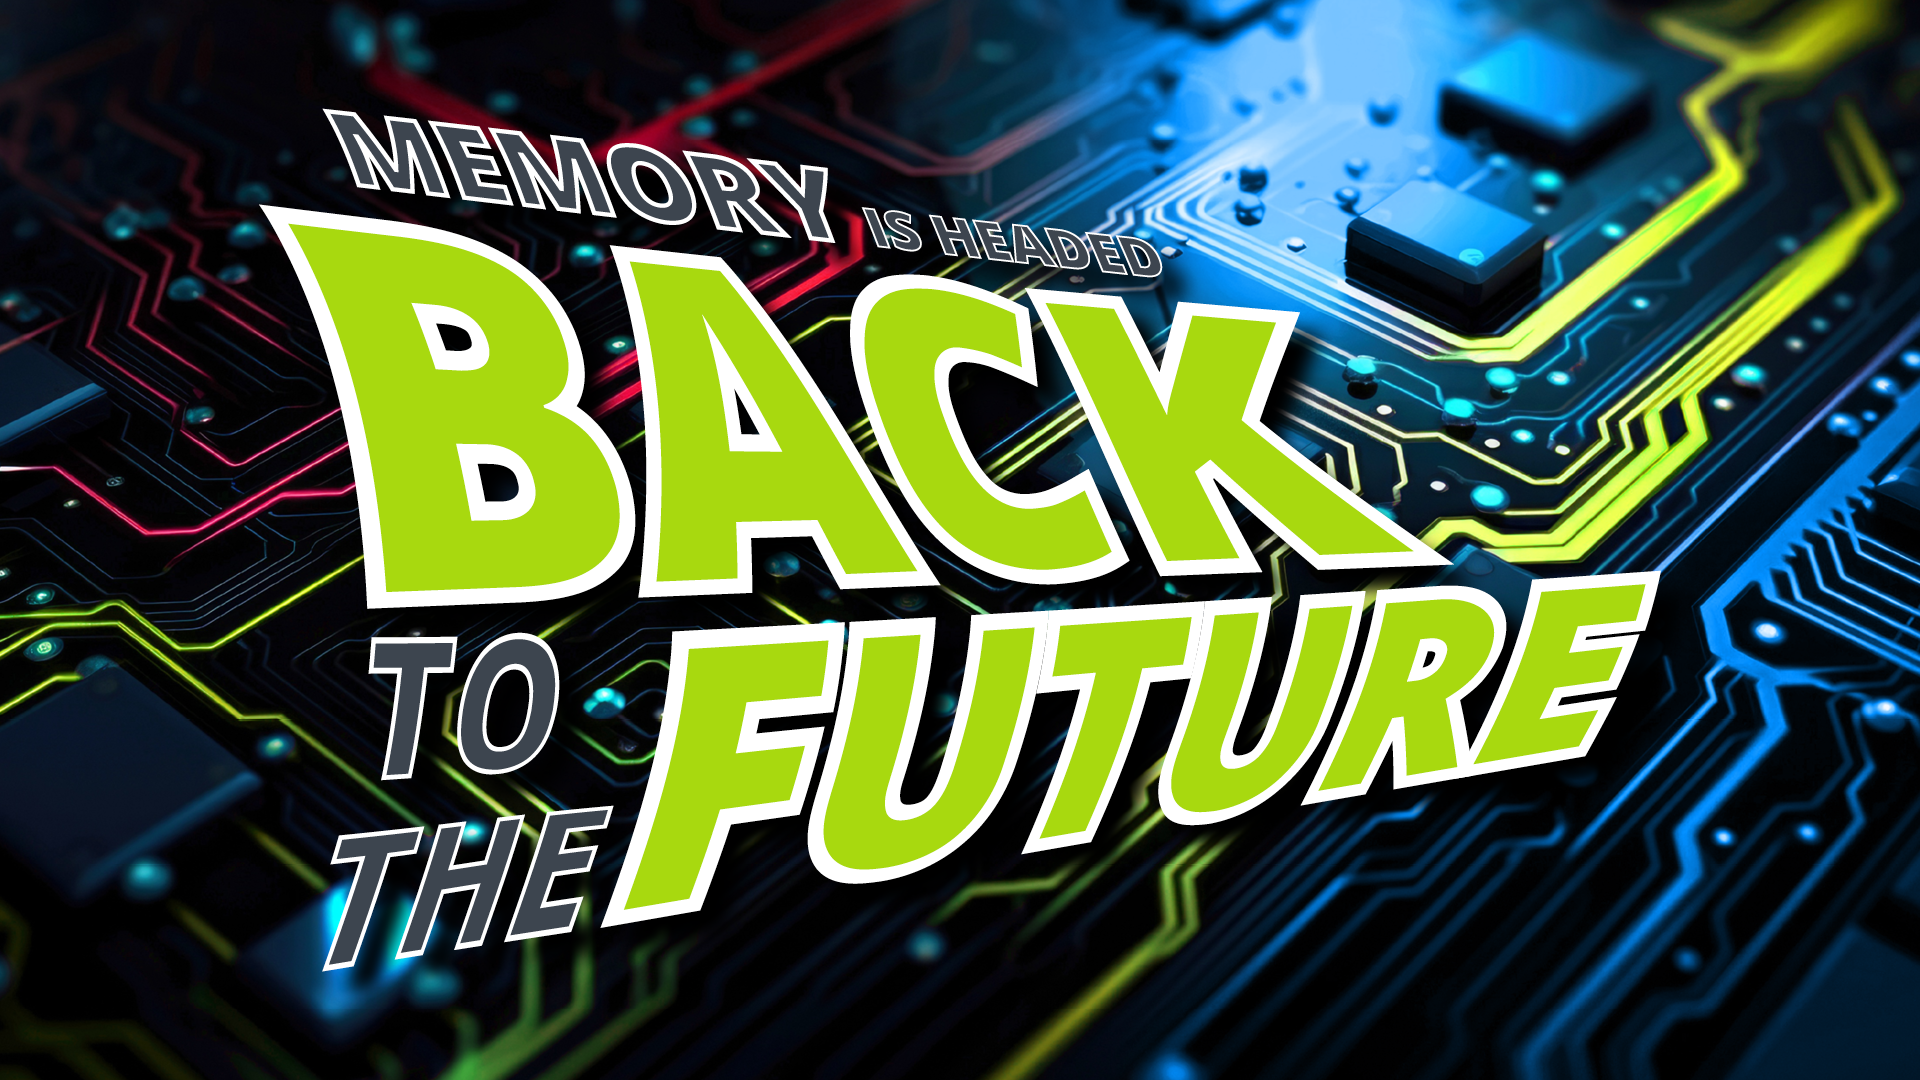 Semiconductor Memory is headed back to the future